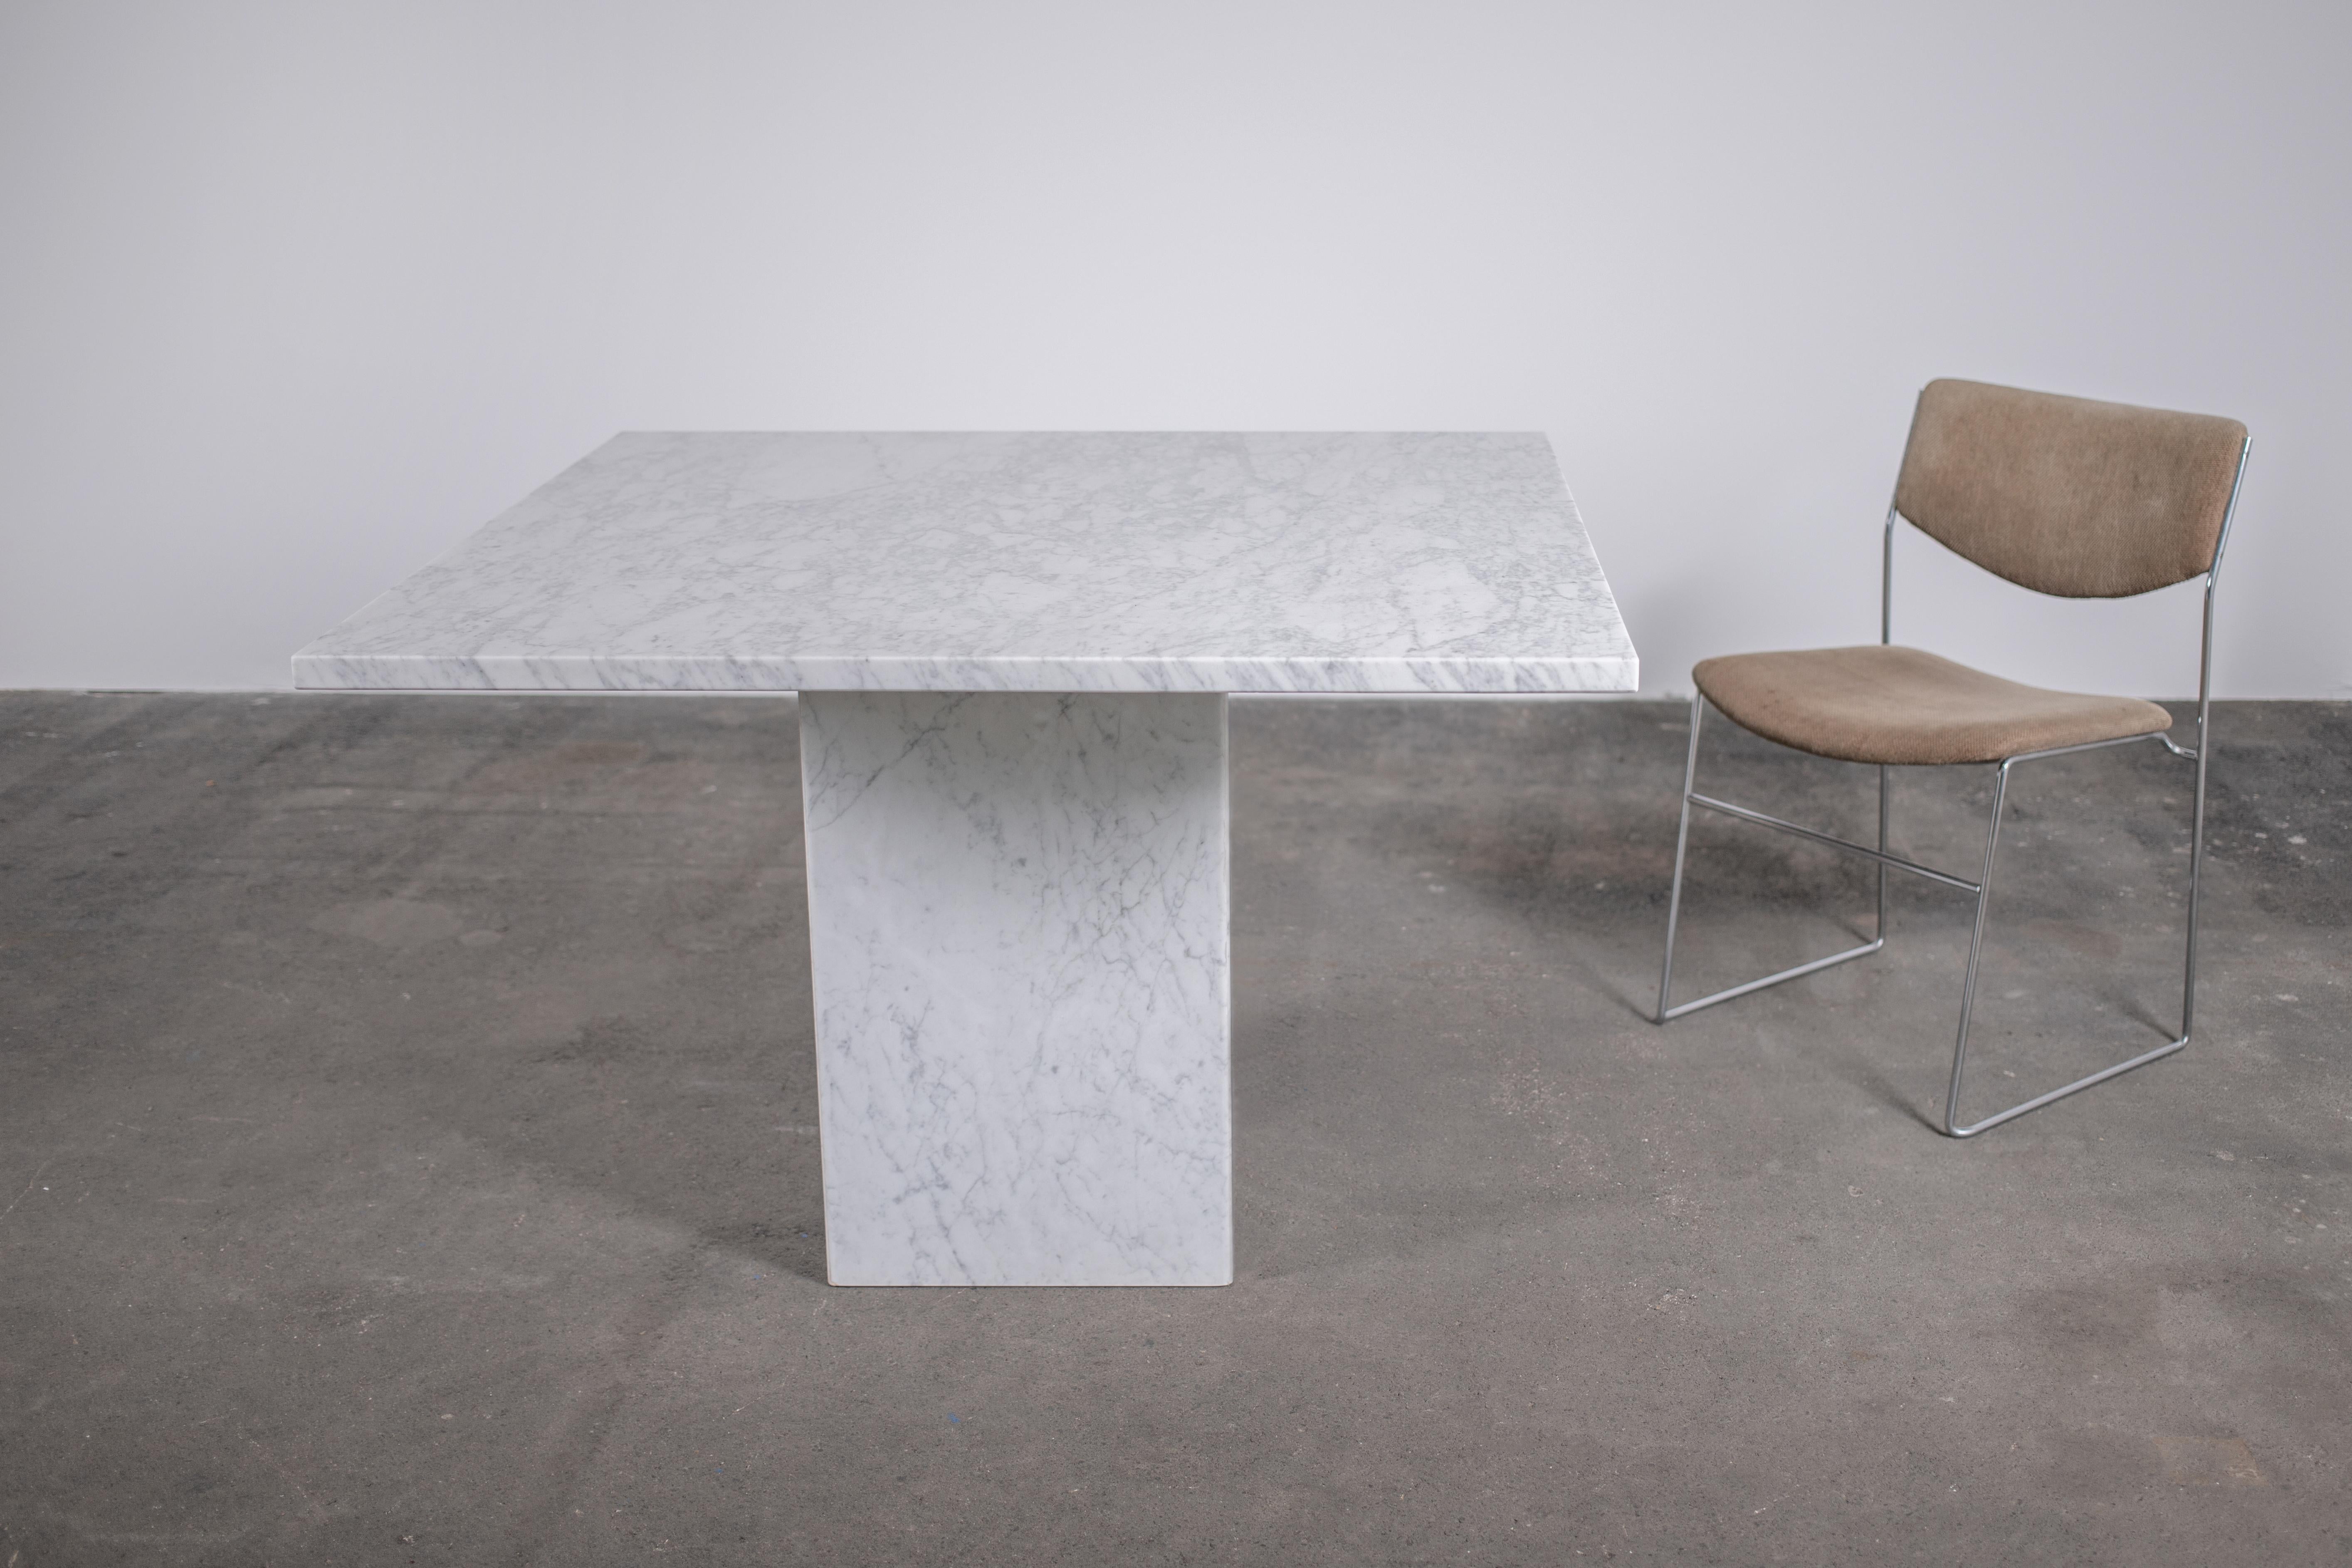 Monumental 1970s vintage Italian white Carrera marble dining table in Brutalist square format with single square leg, also in white Carrera marble. Thick 1 inch (3cm) slab sits atop a base of 4 mitered slabs of the same marble.

Marble is in very